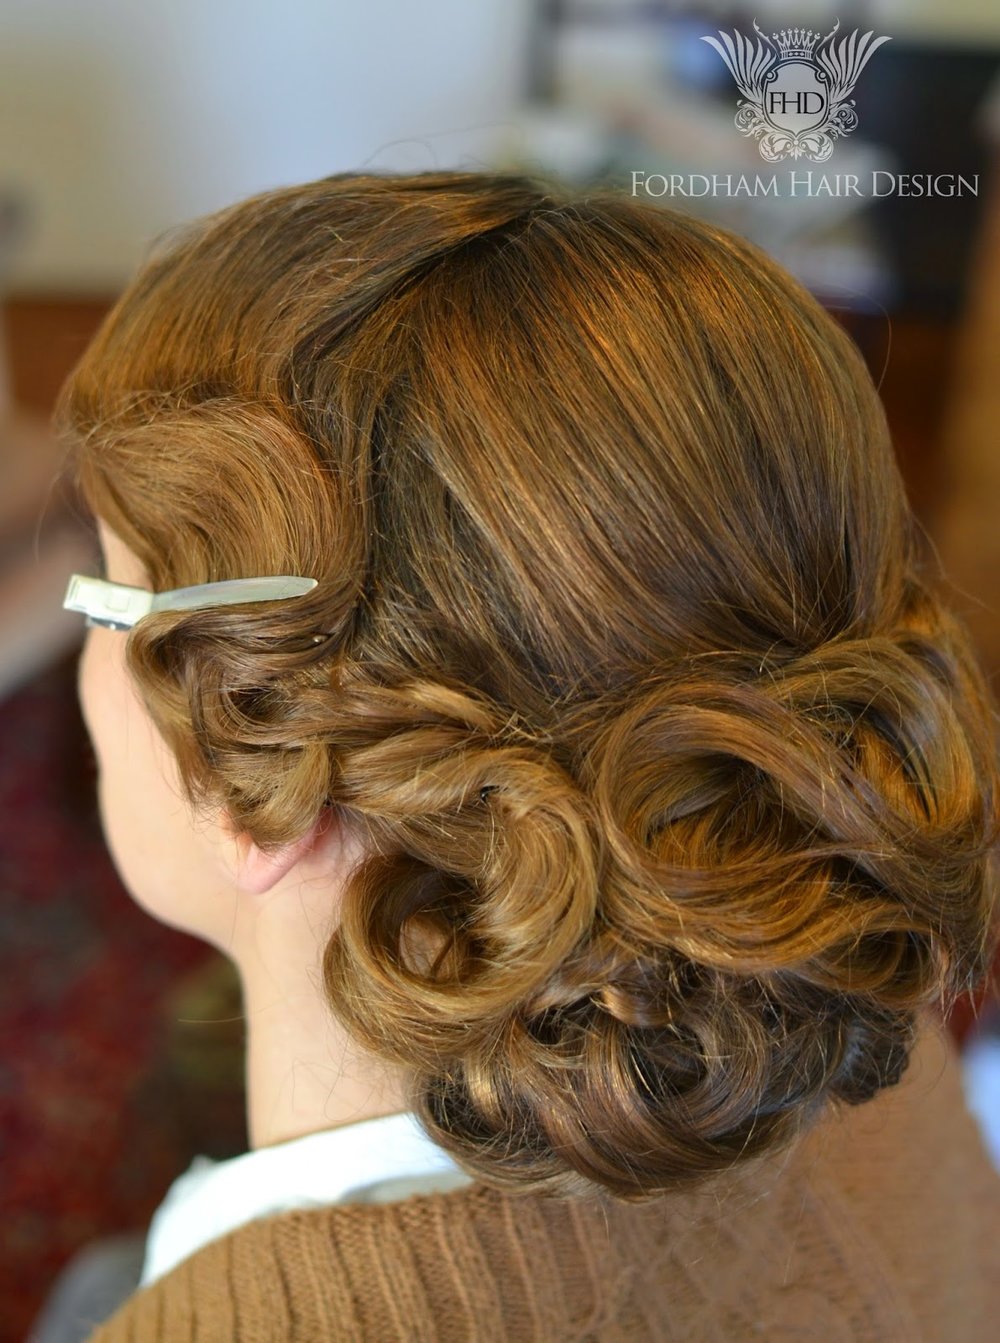 Vintage Wedding Hair with Fingerwaves Inspired by Downton Abbey — Fordham  Hair Design